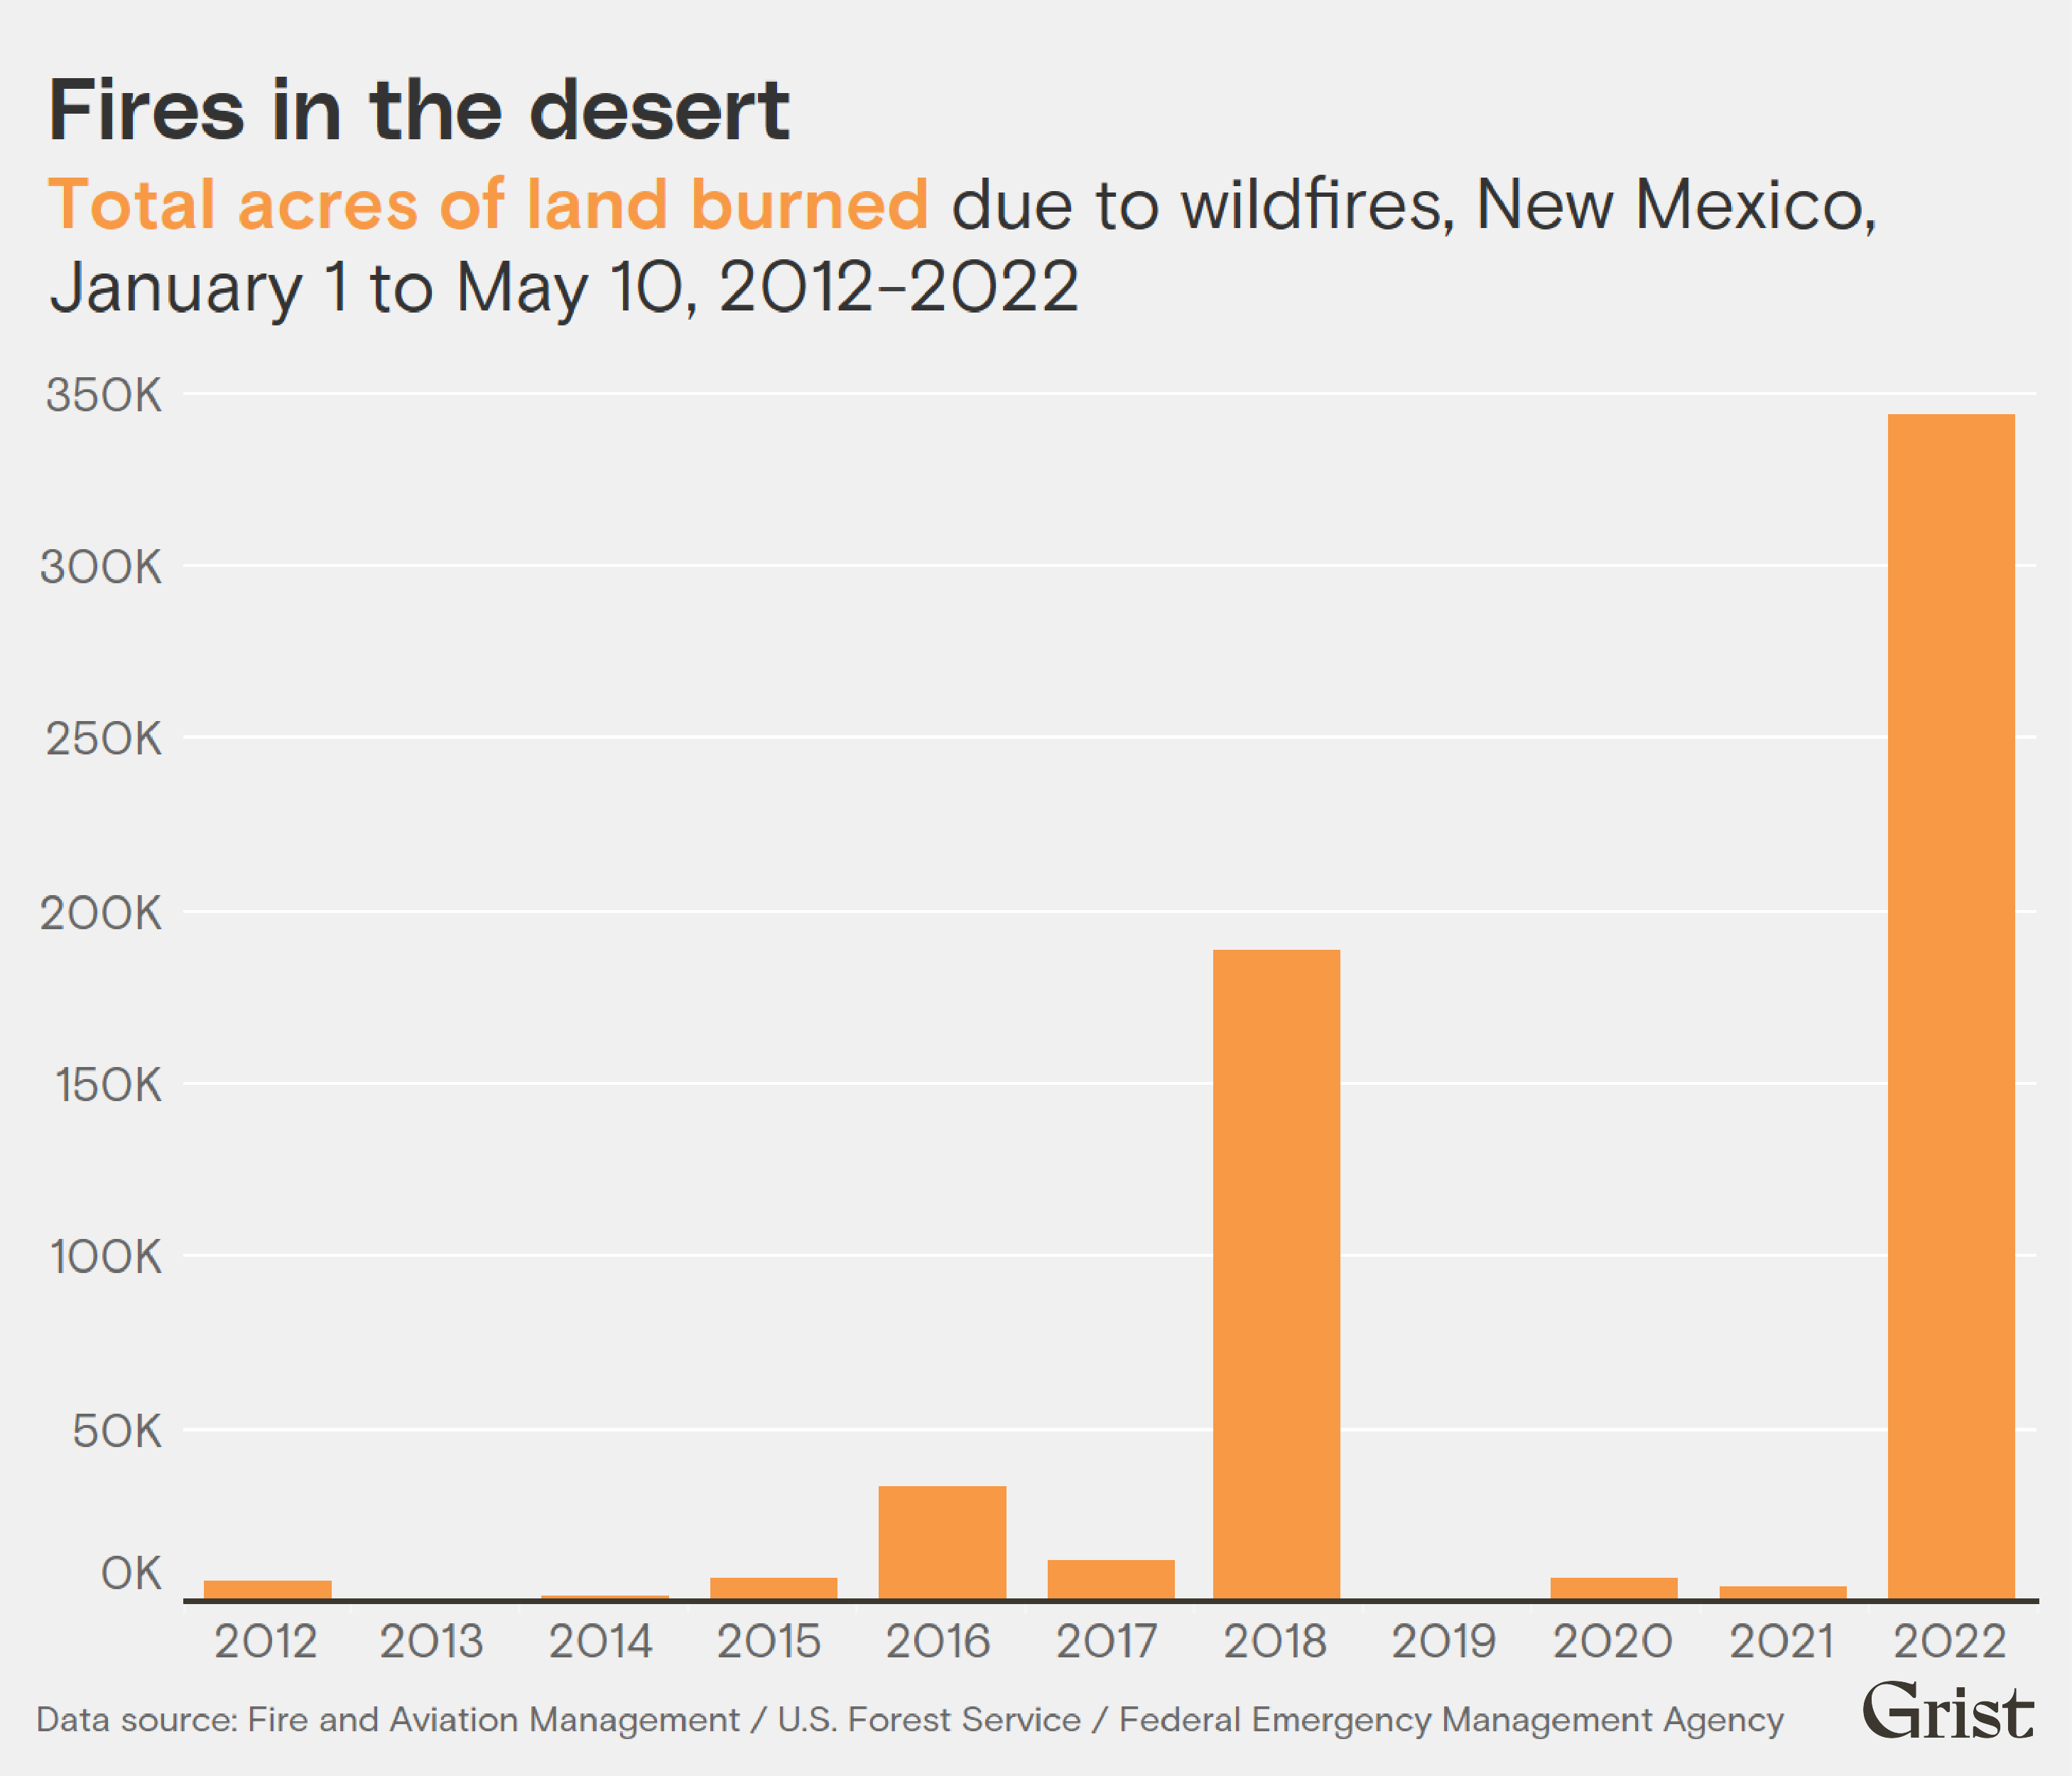 A bar graph showing Total acres of land burned due to wildfires, New Mexico, January 1 to May 10, 2012-2022. 2022 Shows the highest burn area at over 343,000 acres.